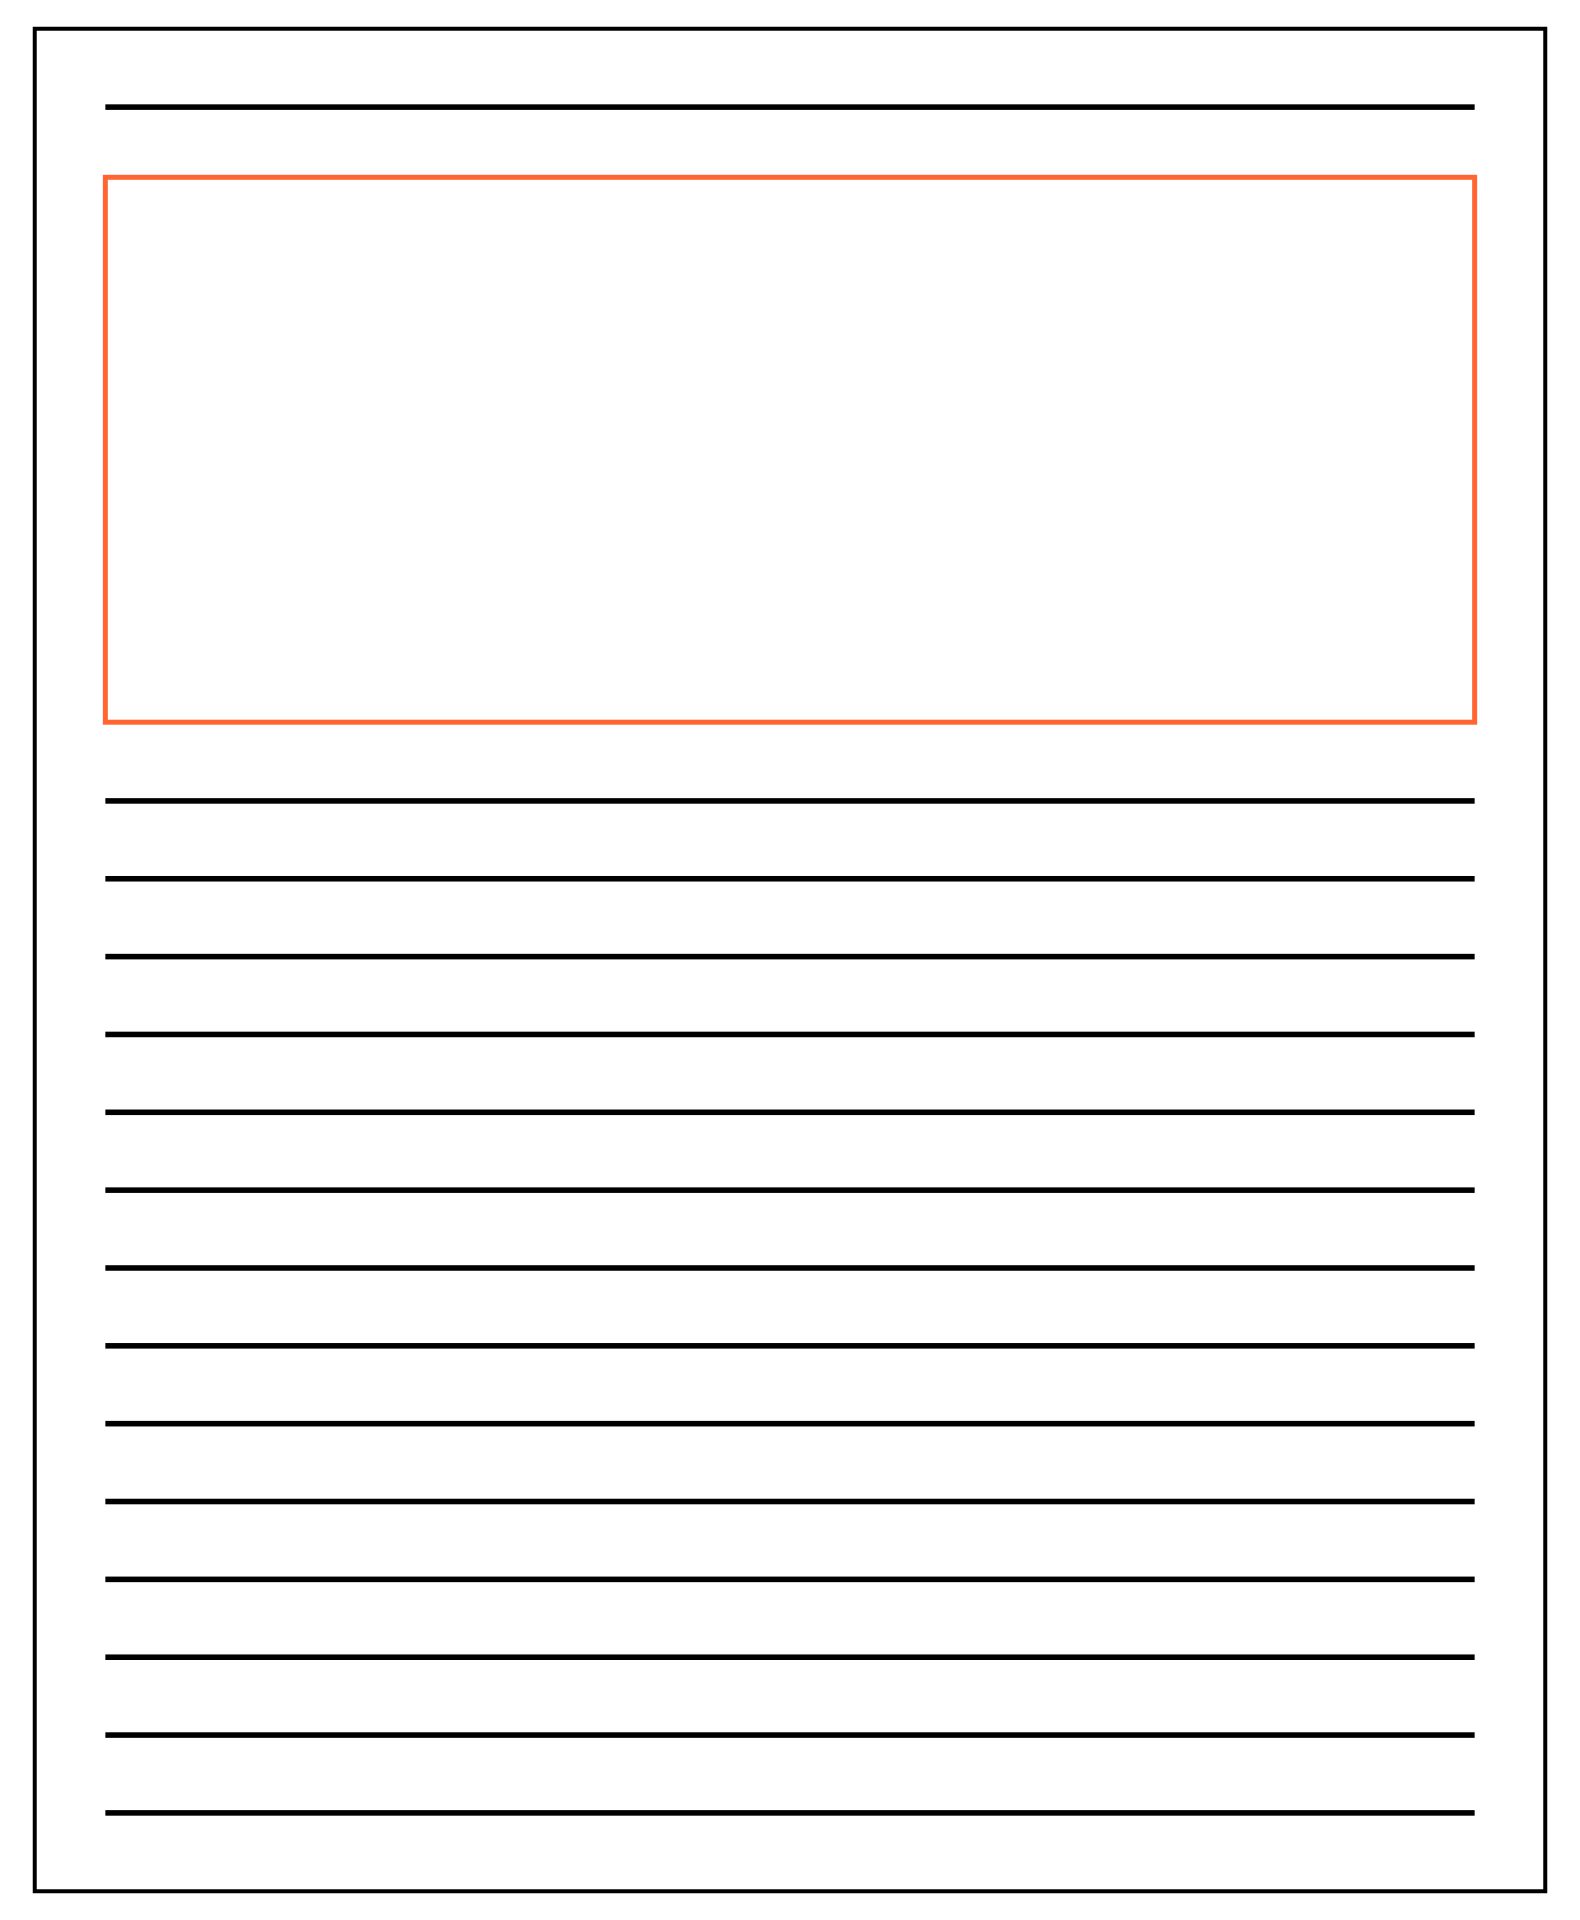 Free Printable Blank Writing Pages_51978